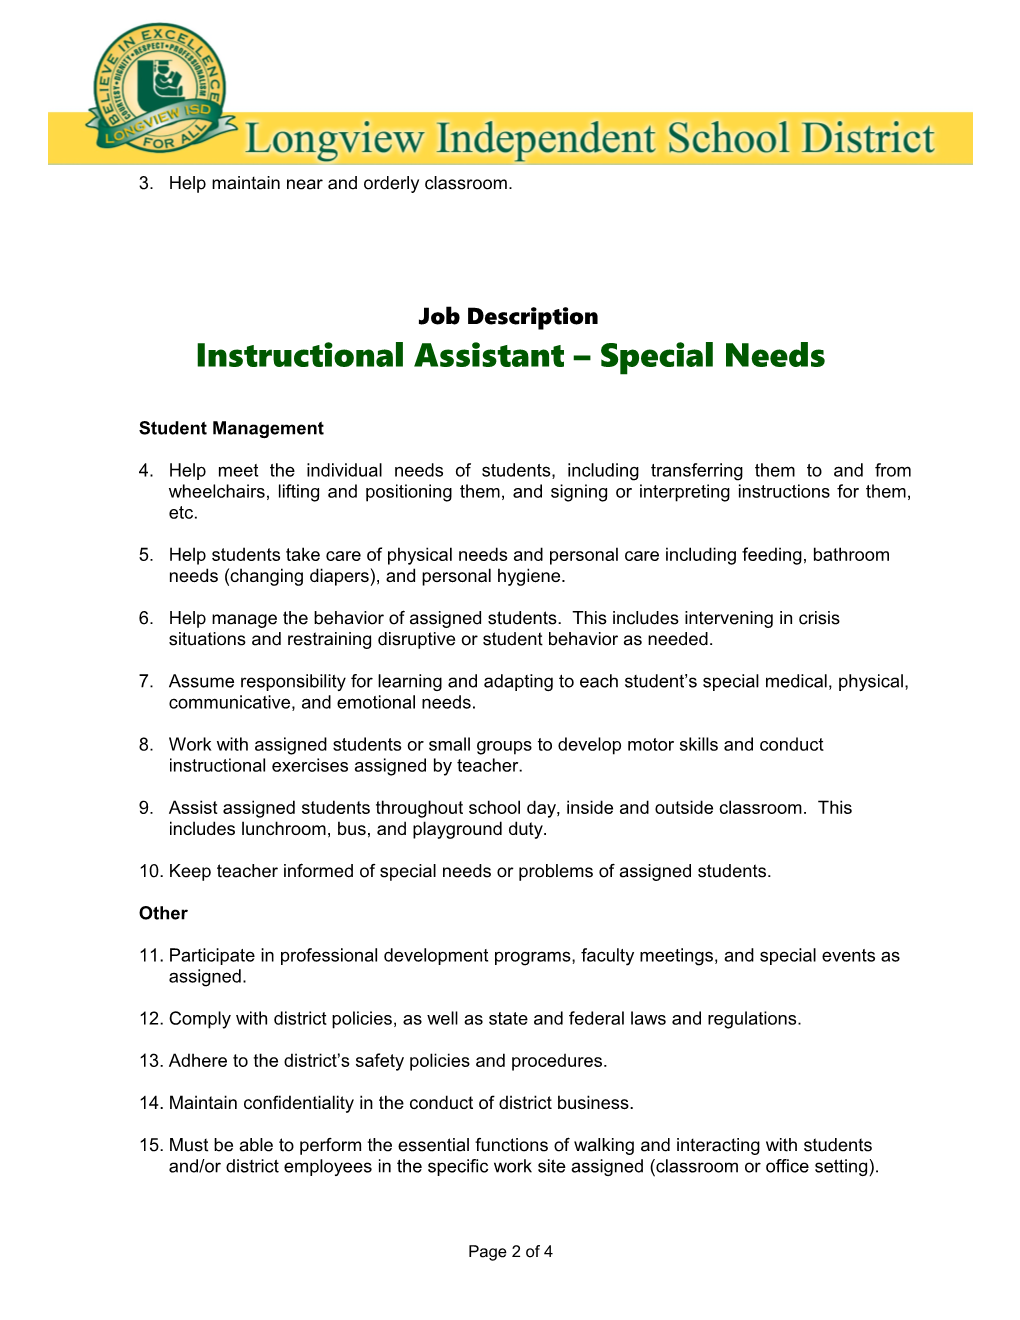 Instructional Assistant Special Needs